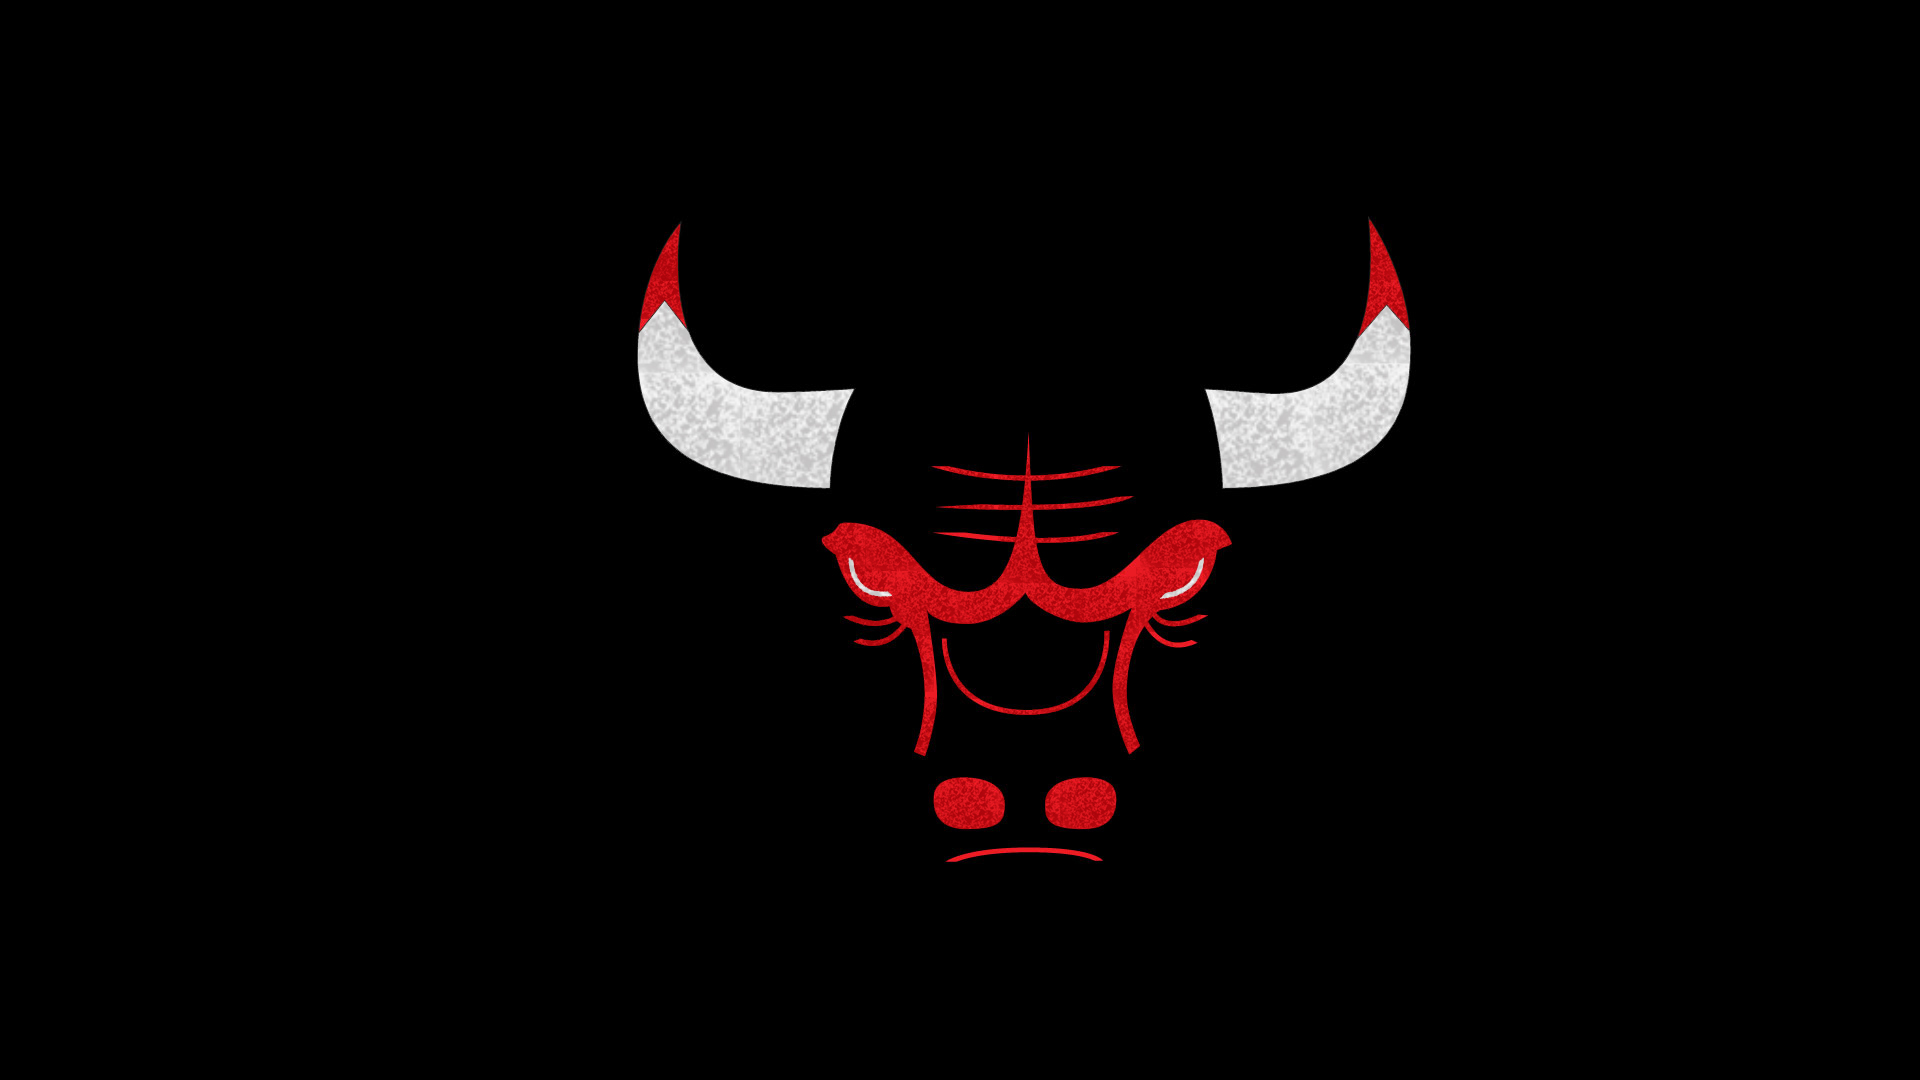 Chicago Bulls images Chicago Bulls wallpapers 1920x1080